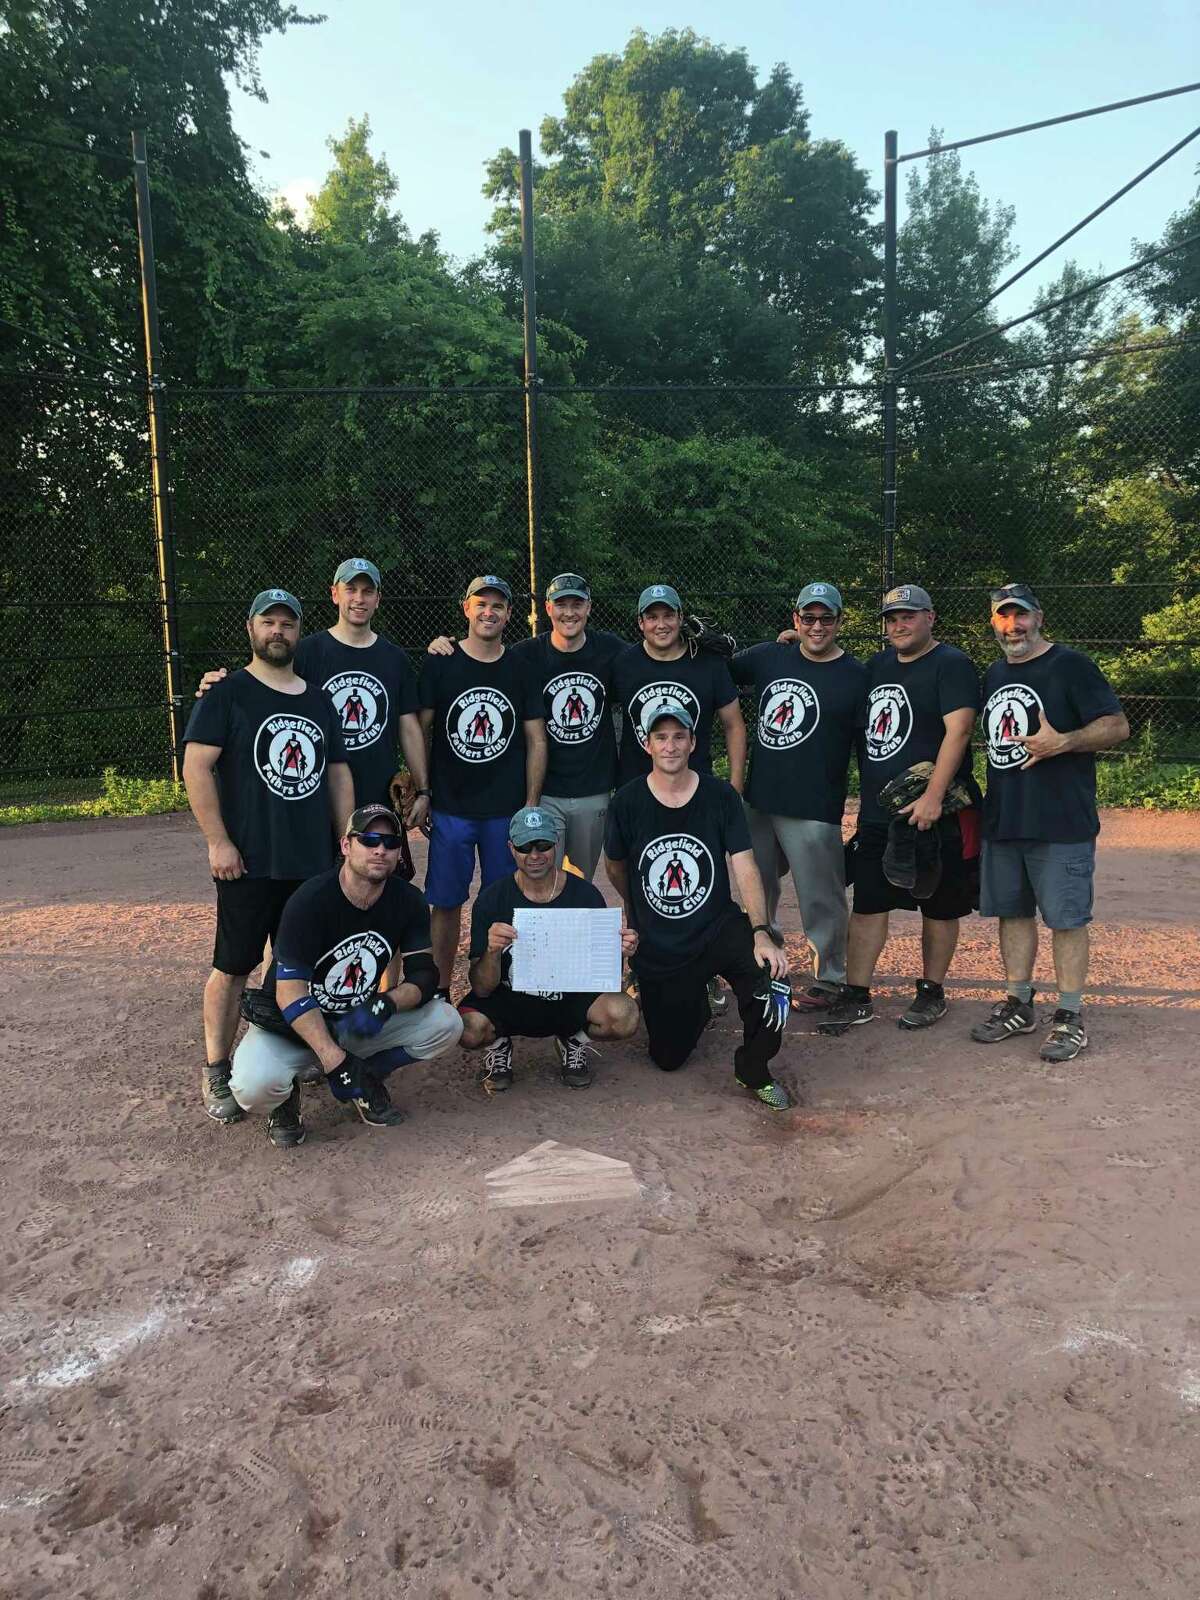 Started after a Facebook post, the Ridgefield Fathers Club softball team gathers for a post-game photo. Back row (left to right): Justin DiGrazia, Adrian Thibodeau, Jason Smith, Paul Dyer, Ed Winstanley, Aaron Lockwood, Joe Attonito, Tony Grau; bottom row: Charlie Taney, Mike Schmer, Dave Parsons.